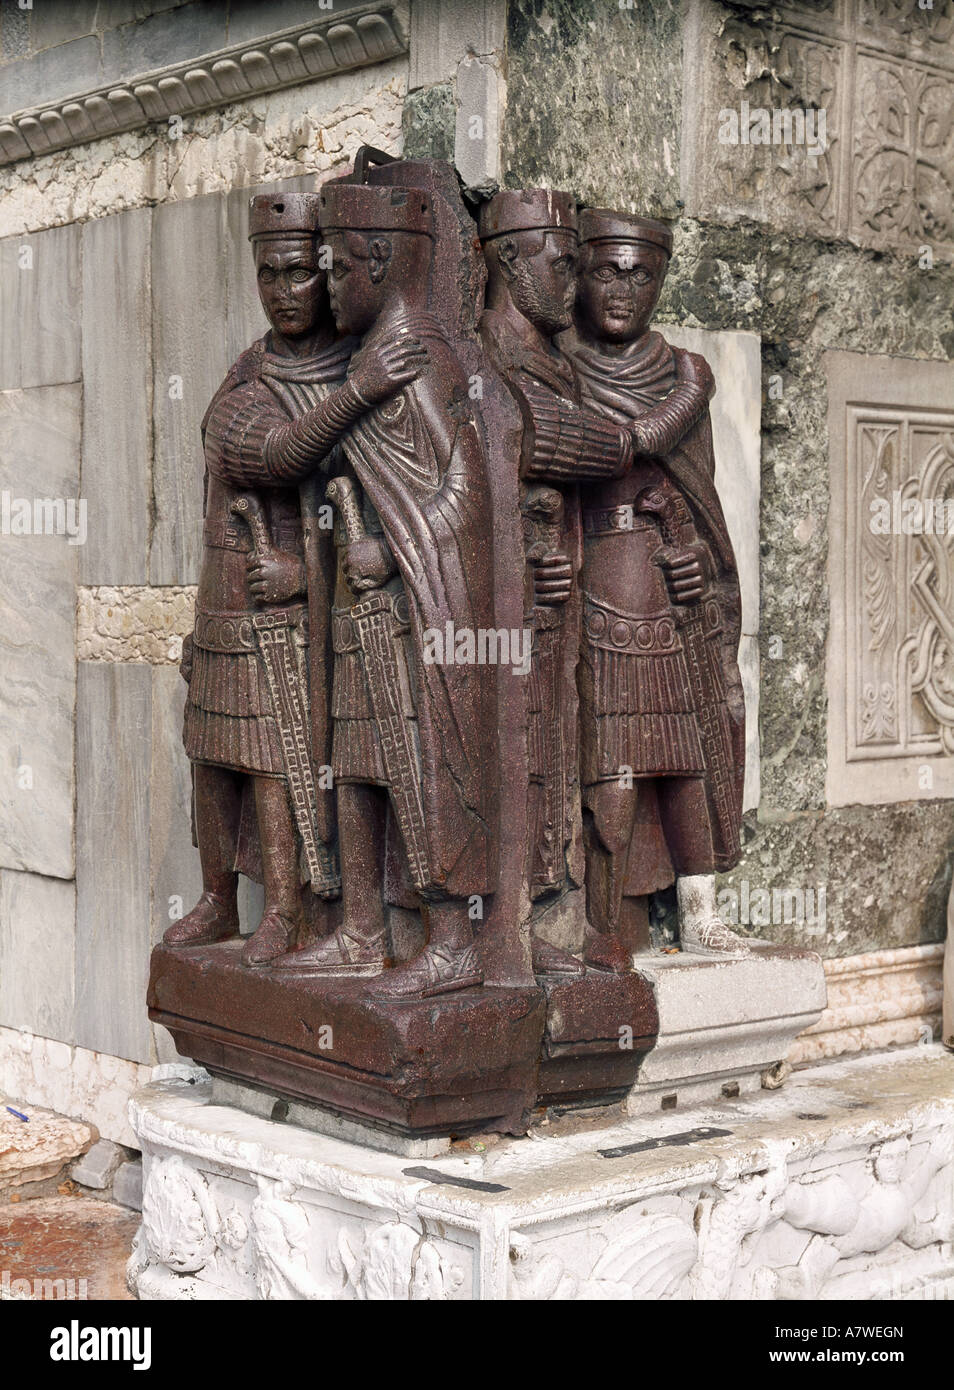 fine arts, ancient world, Roman Empire, sculpture, the Tetrarchs, emperors Diocletianus, Maximianus, Galerius and Constantius Chlorus, porhyry, 300 - 305 AD, Venice, , Artist's Copyright has not to be cleared Stock Photo